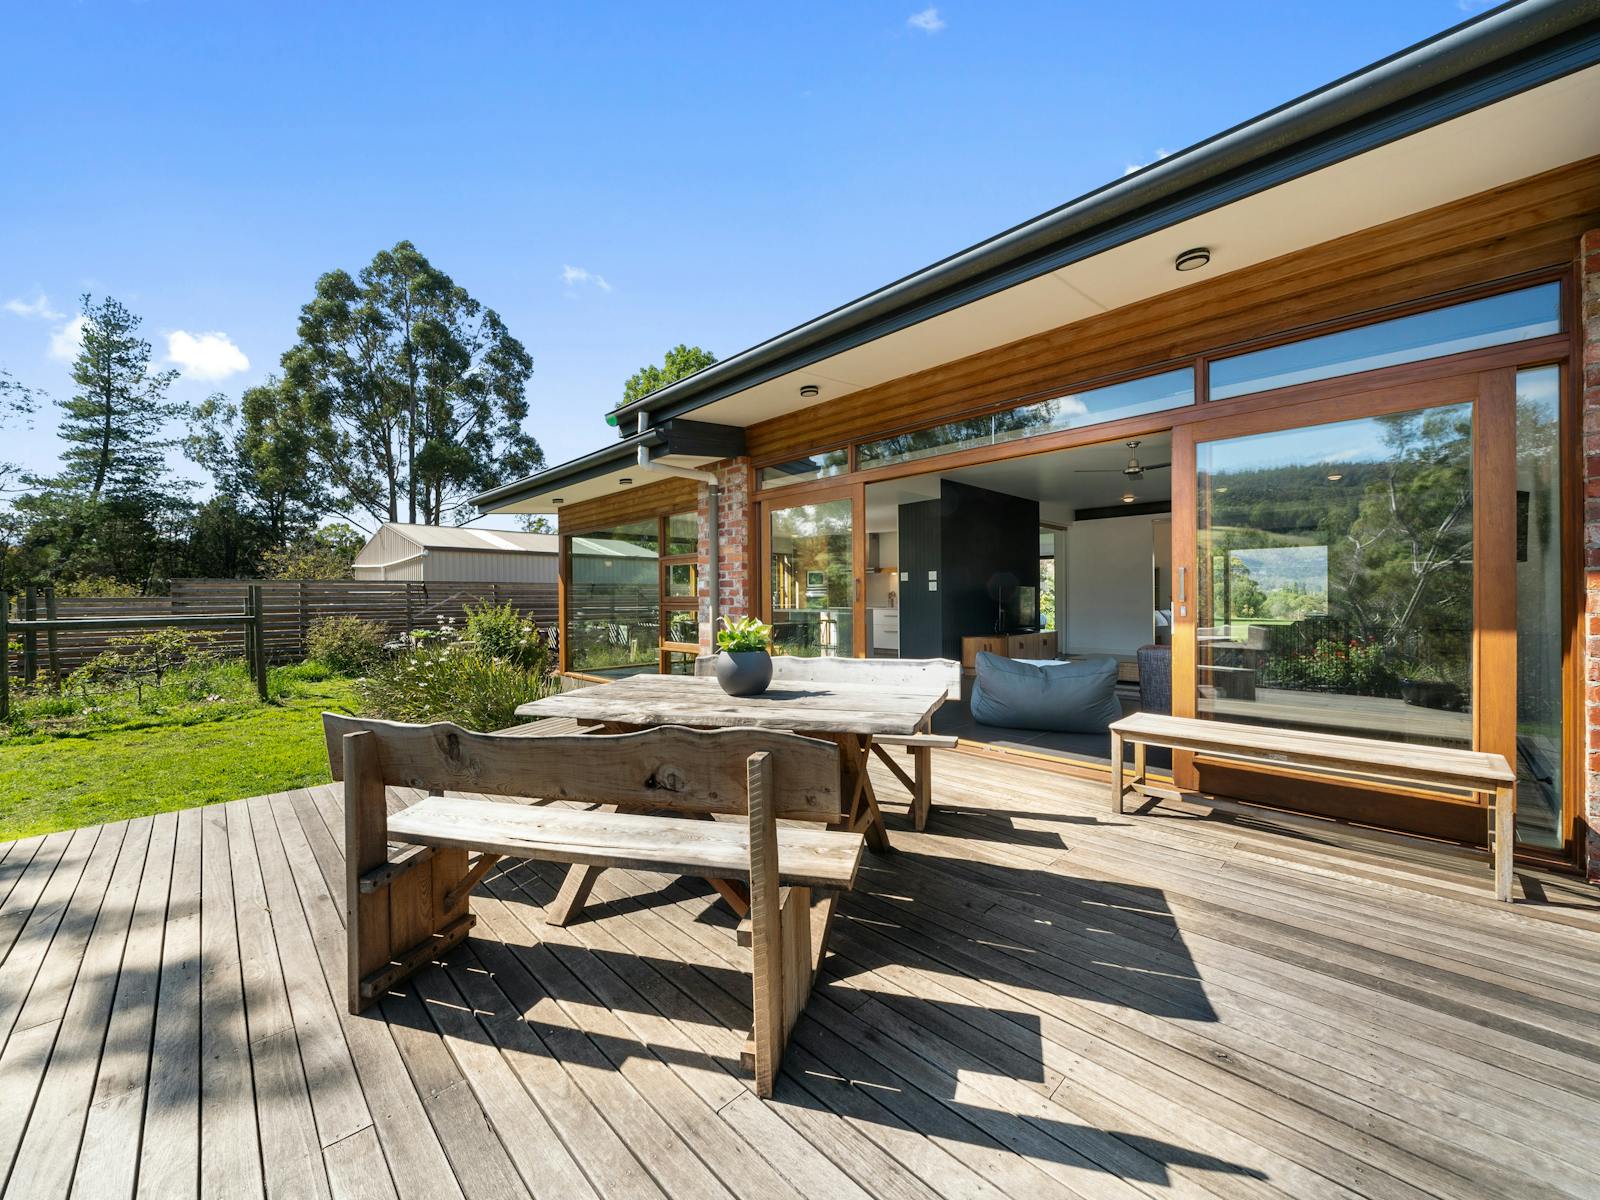 The main deck adjoining the living room provides outdoor dining and views over the river and valley